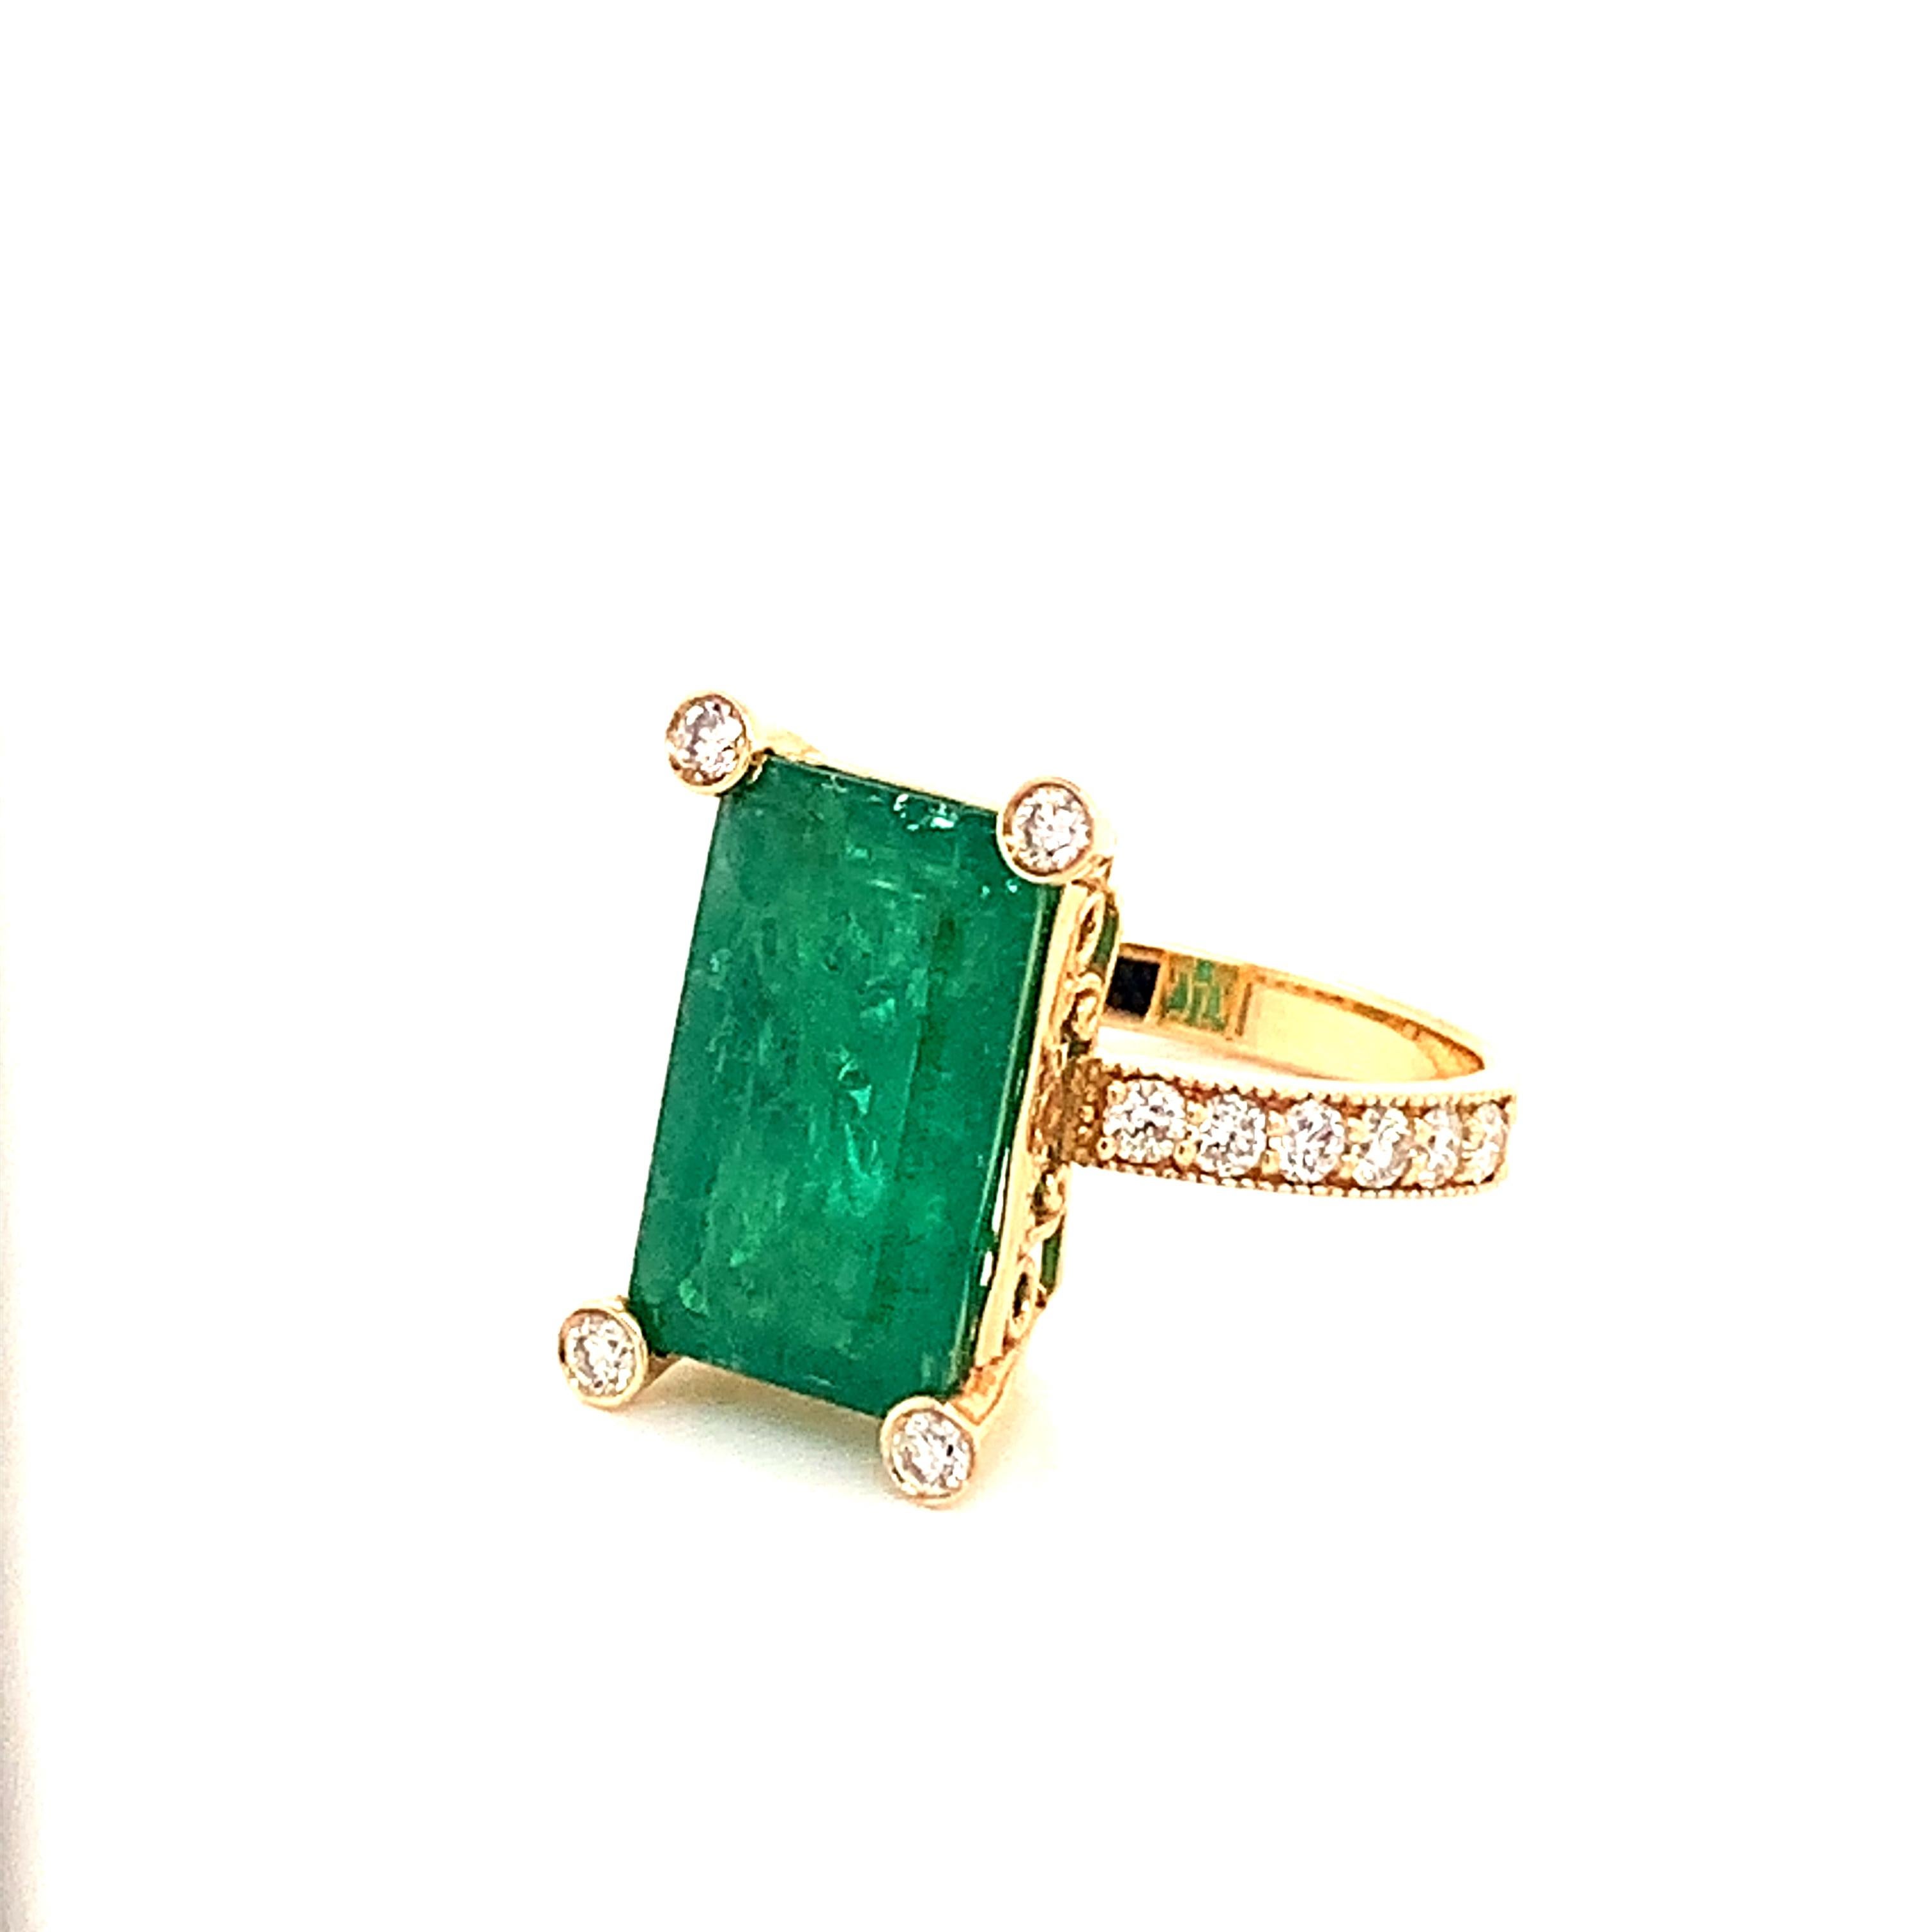 Natural Emerald Diamond Ring 14k Gold 4.37 TCW GIA Certified For Sale 1